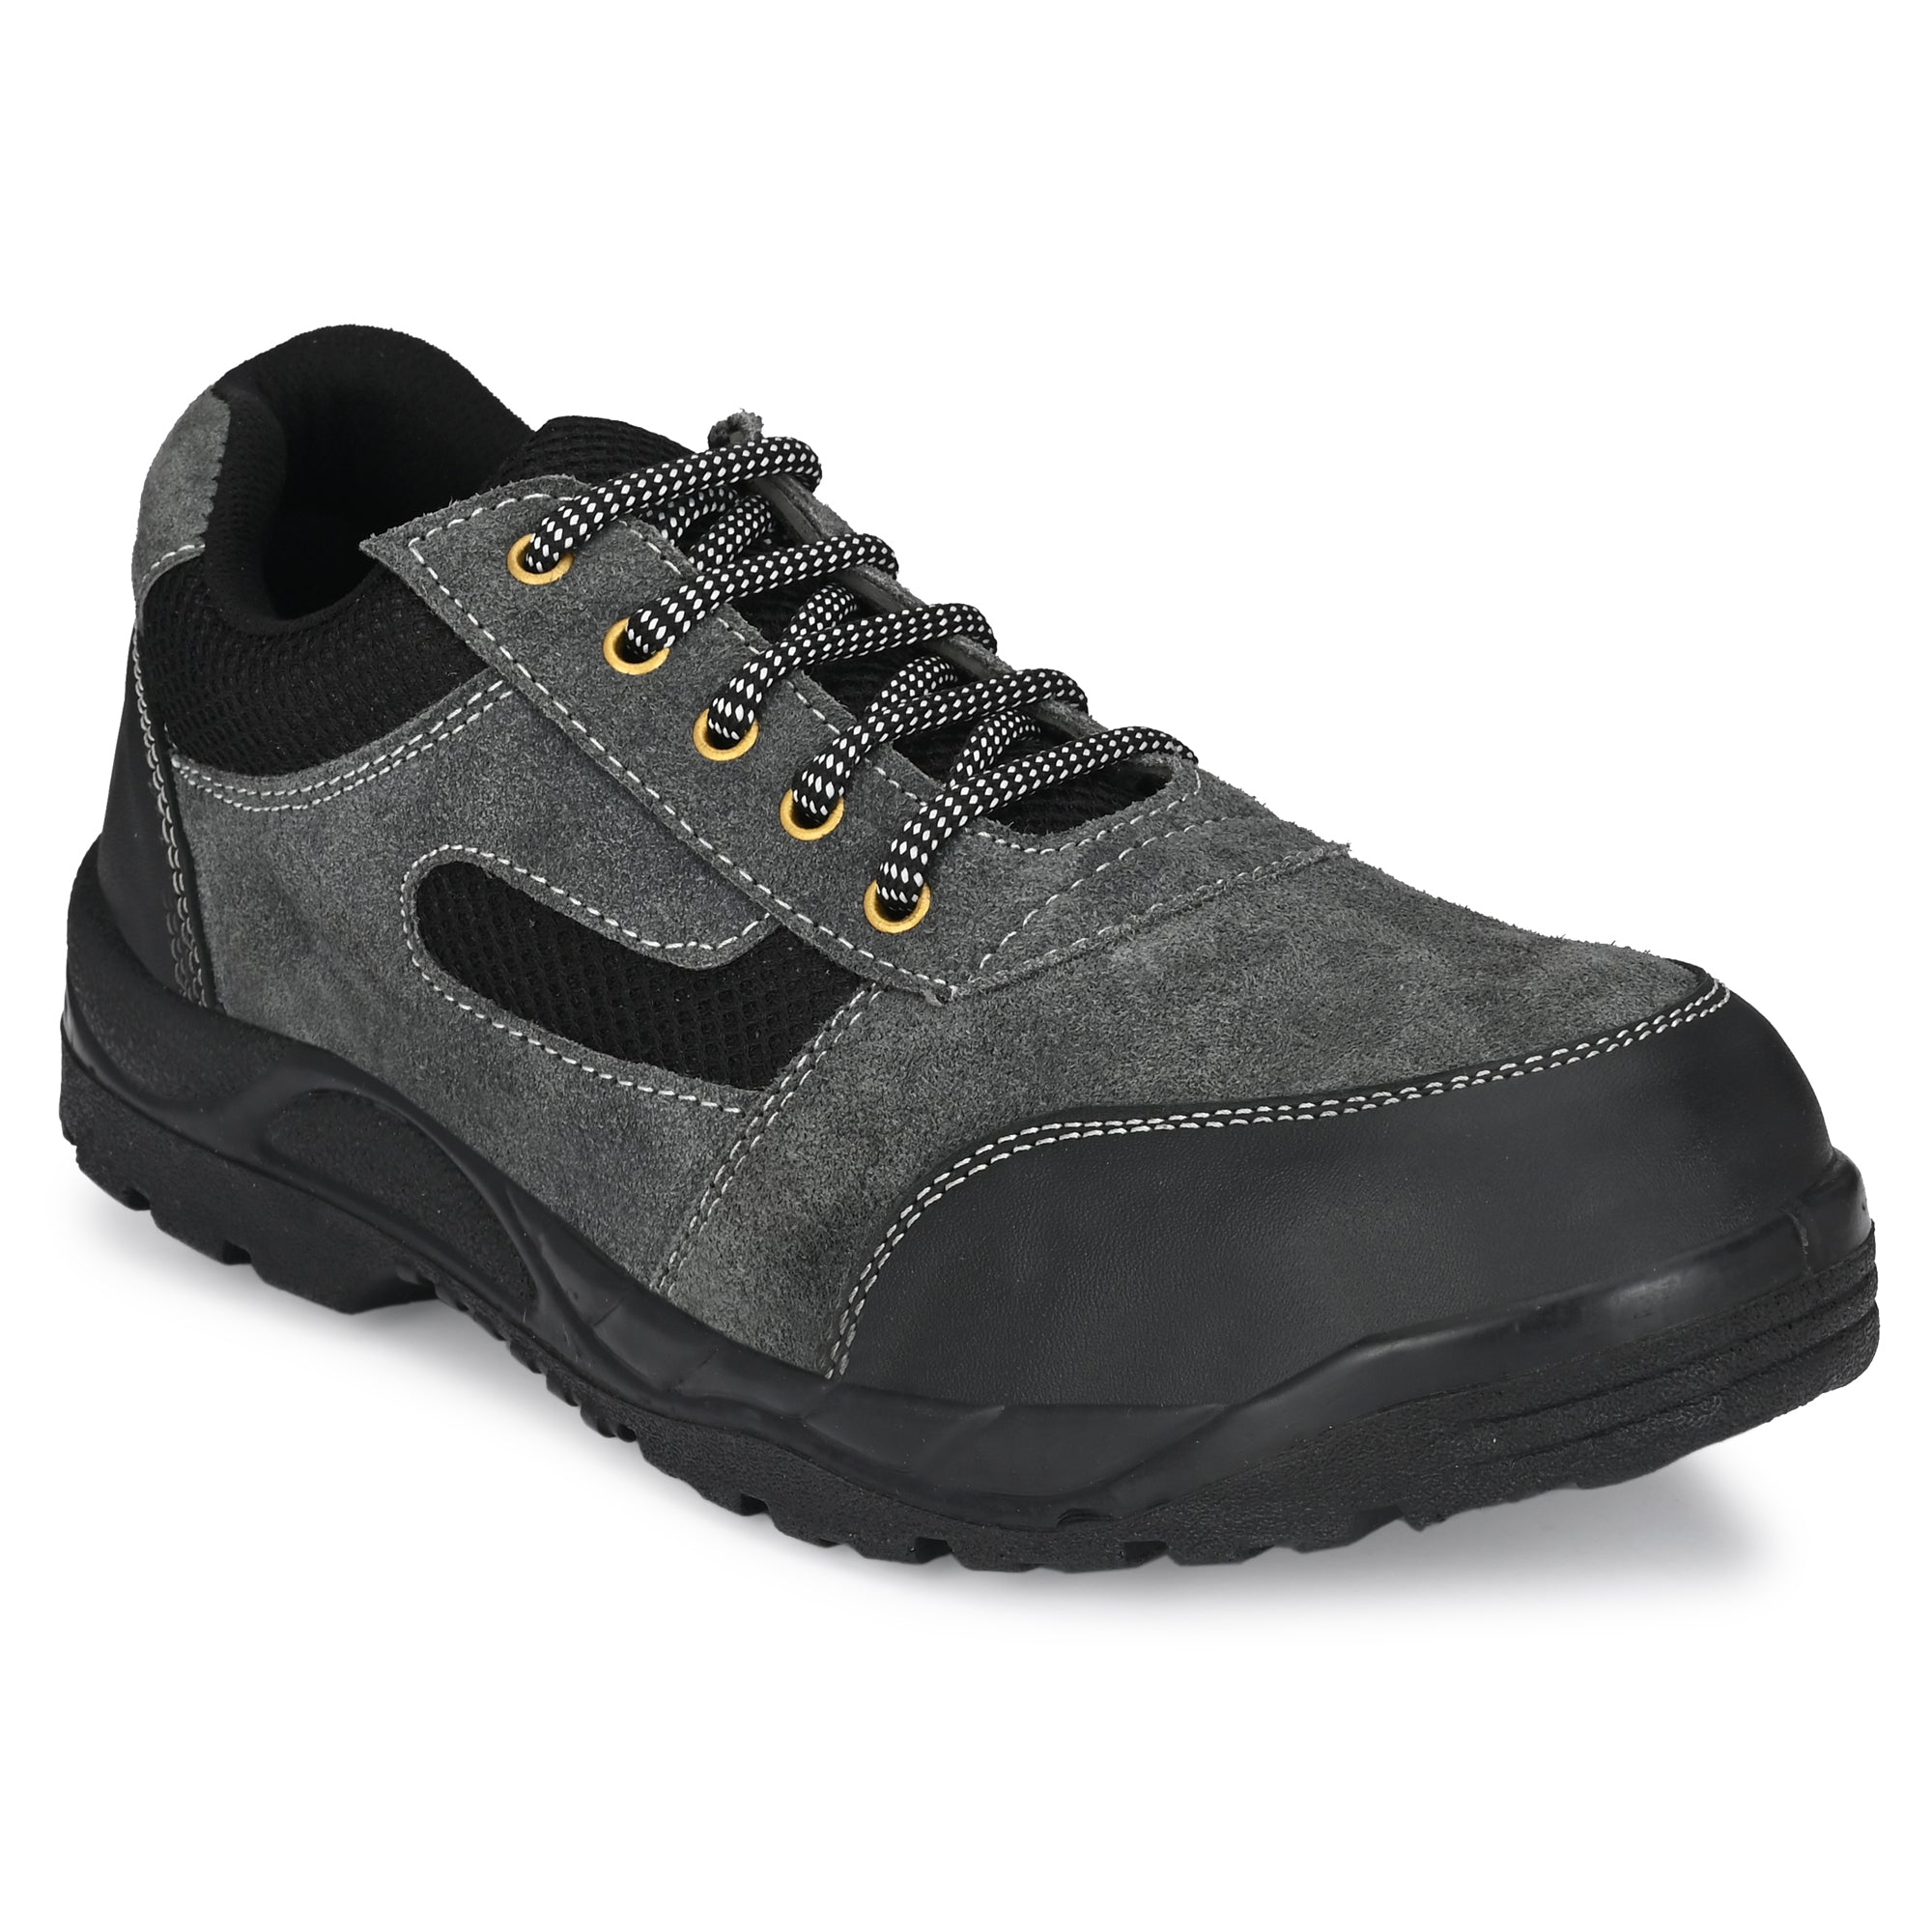 Kavacha Panther Grey Suede Leather Steel Toe Safety Shoe PU Sole